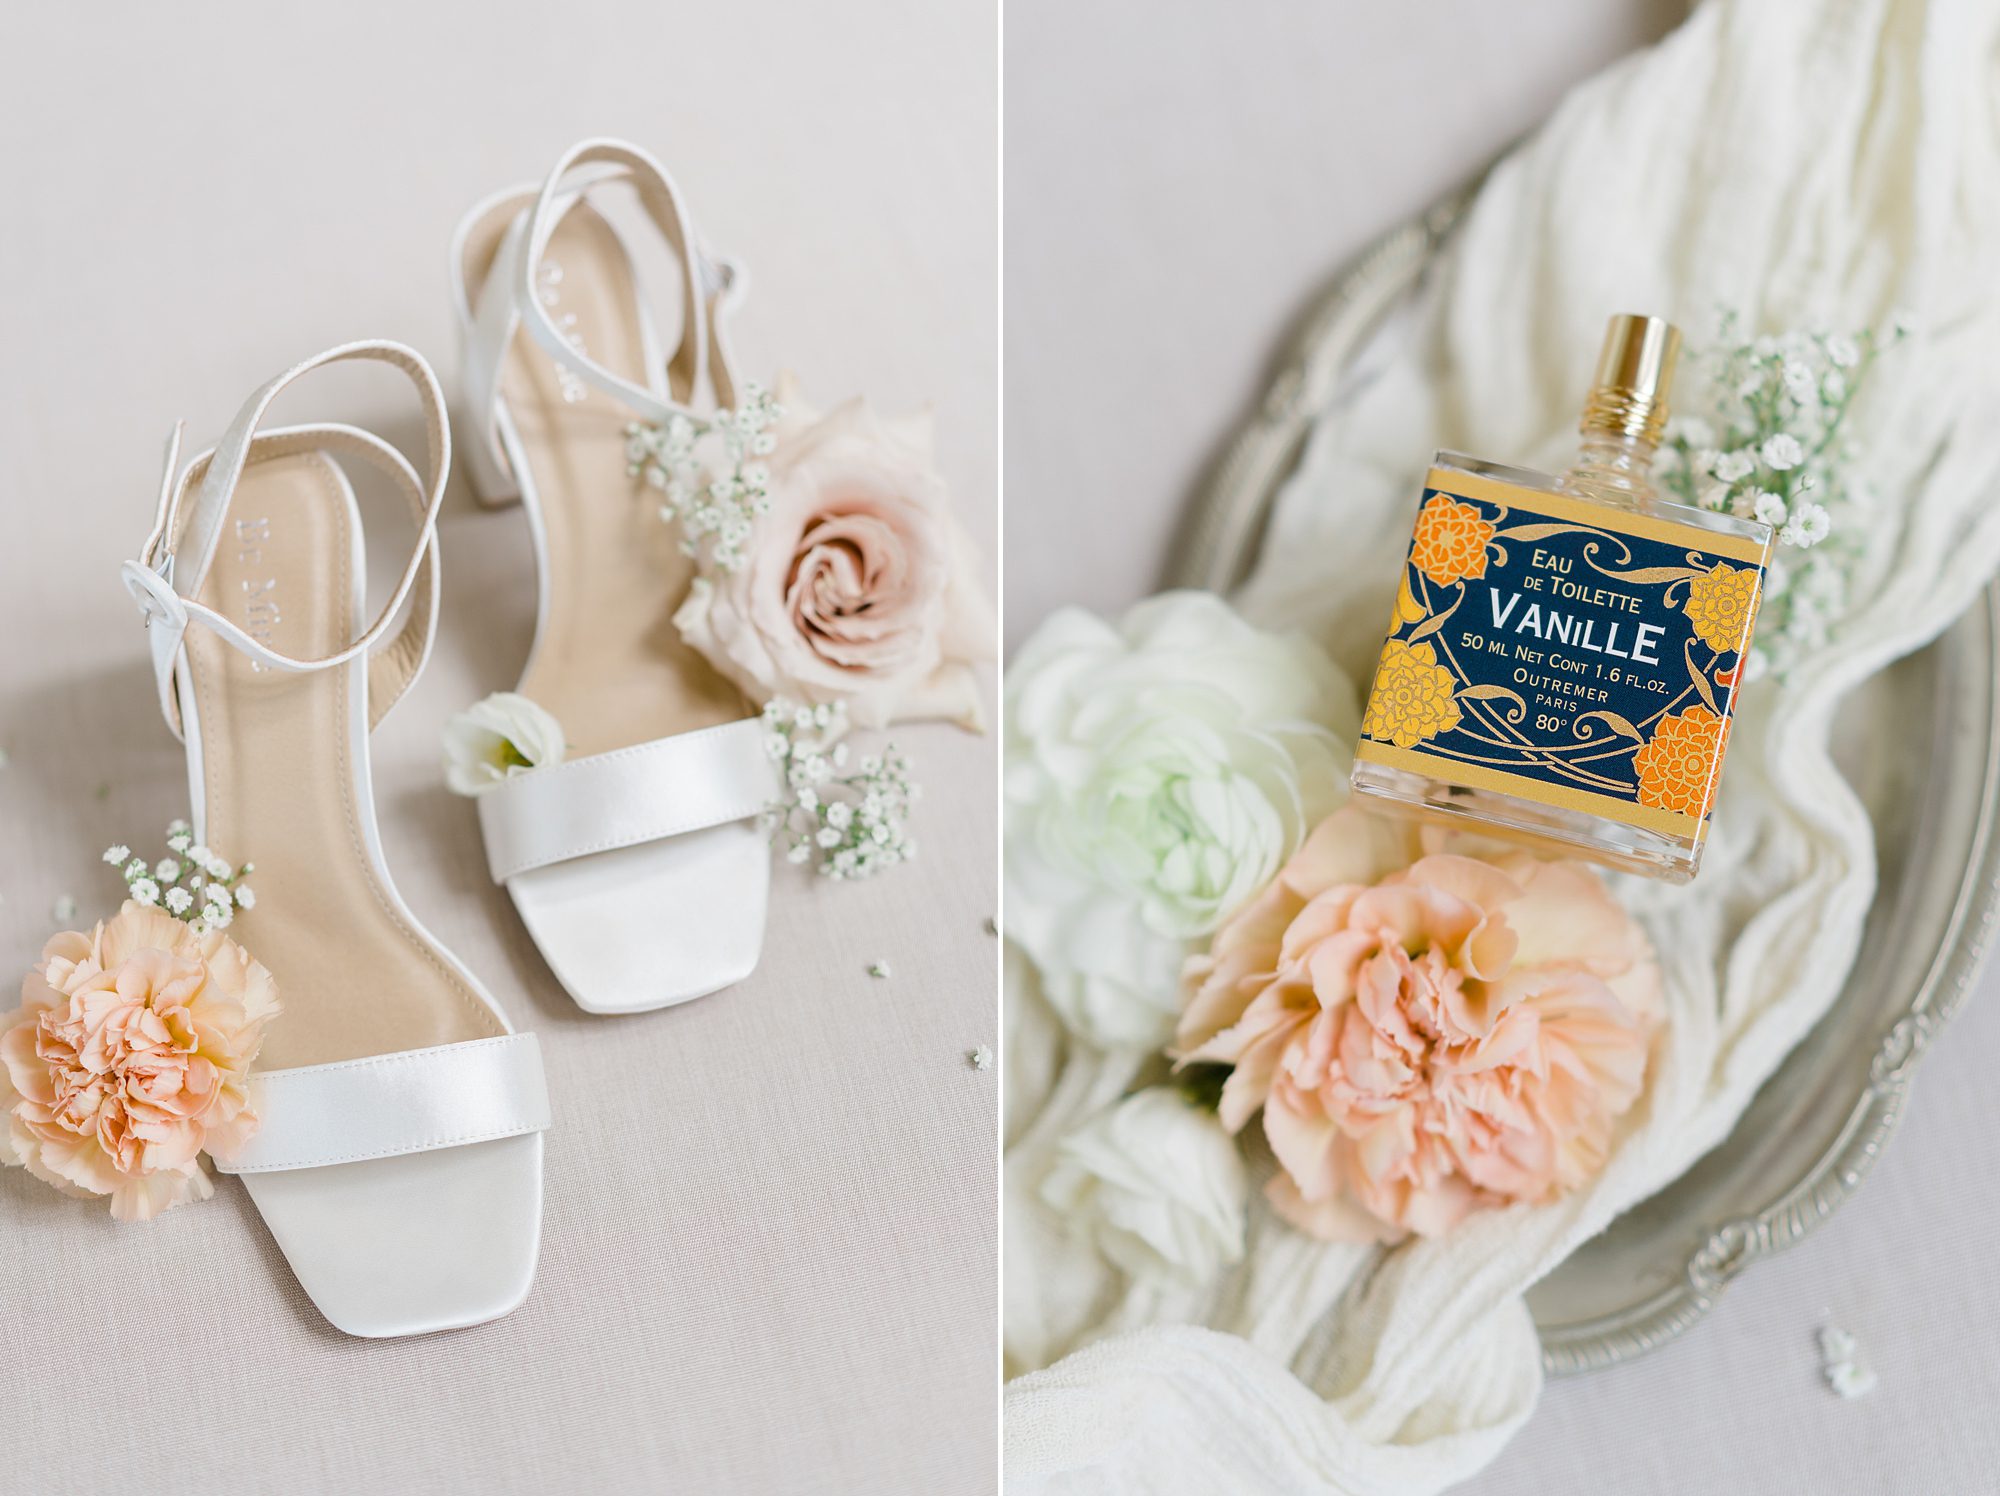 wedding shoes and details